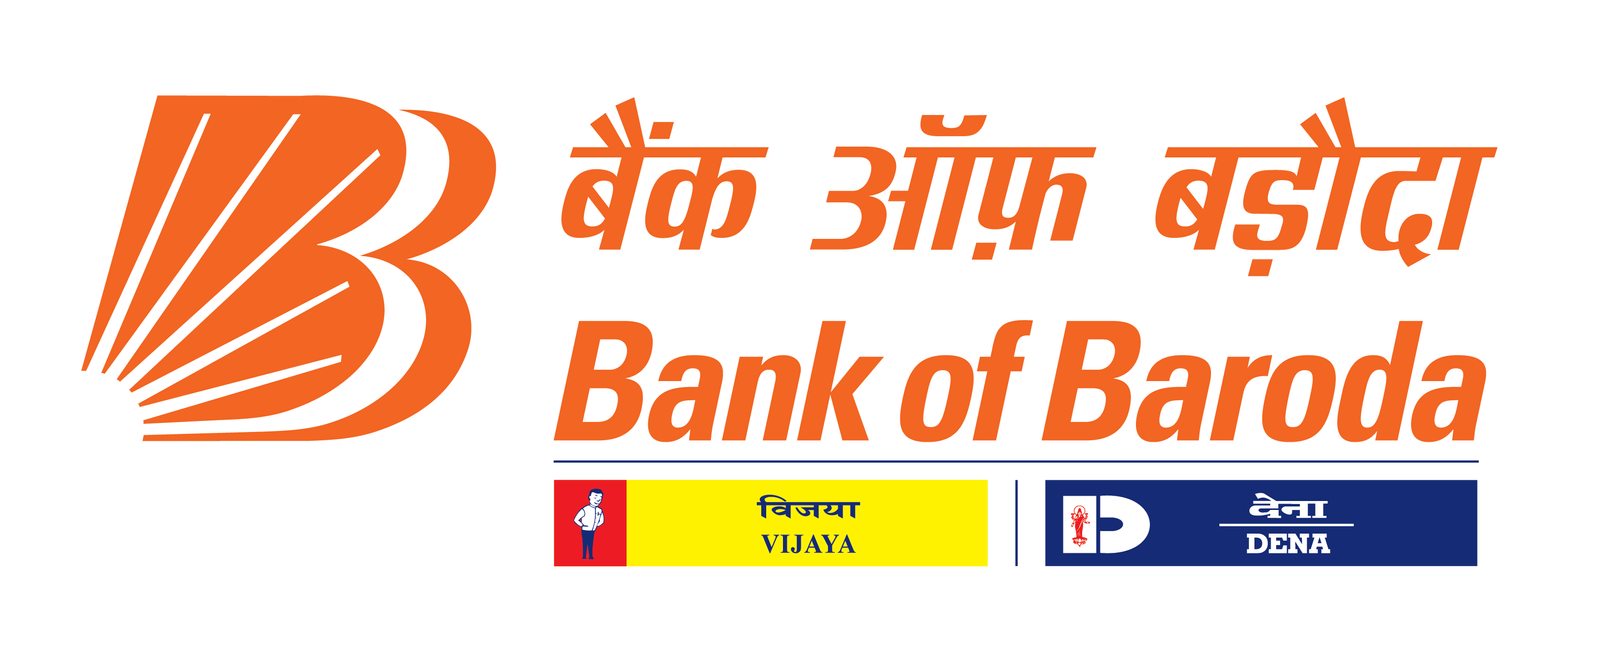 bank-of-baroda-cuts-lending-rate-by-10-bps-to-6-75